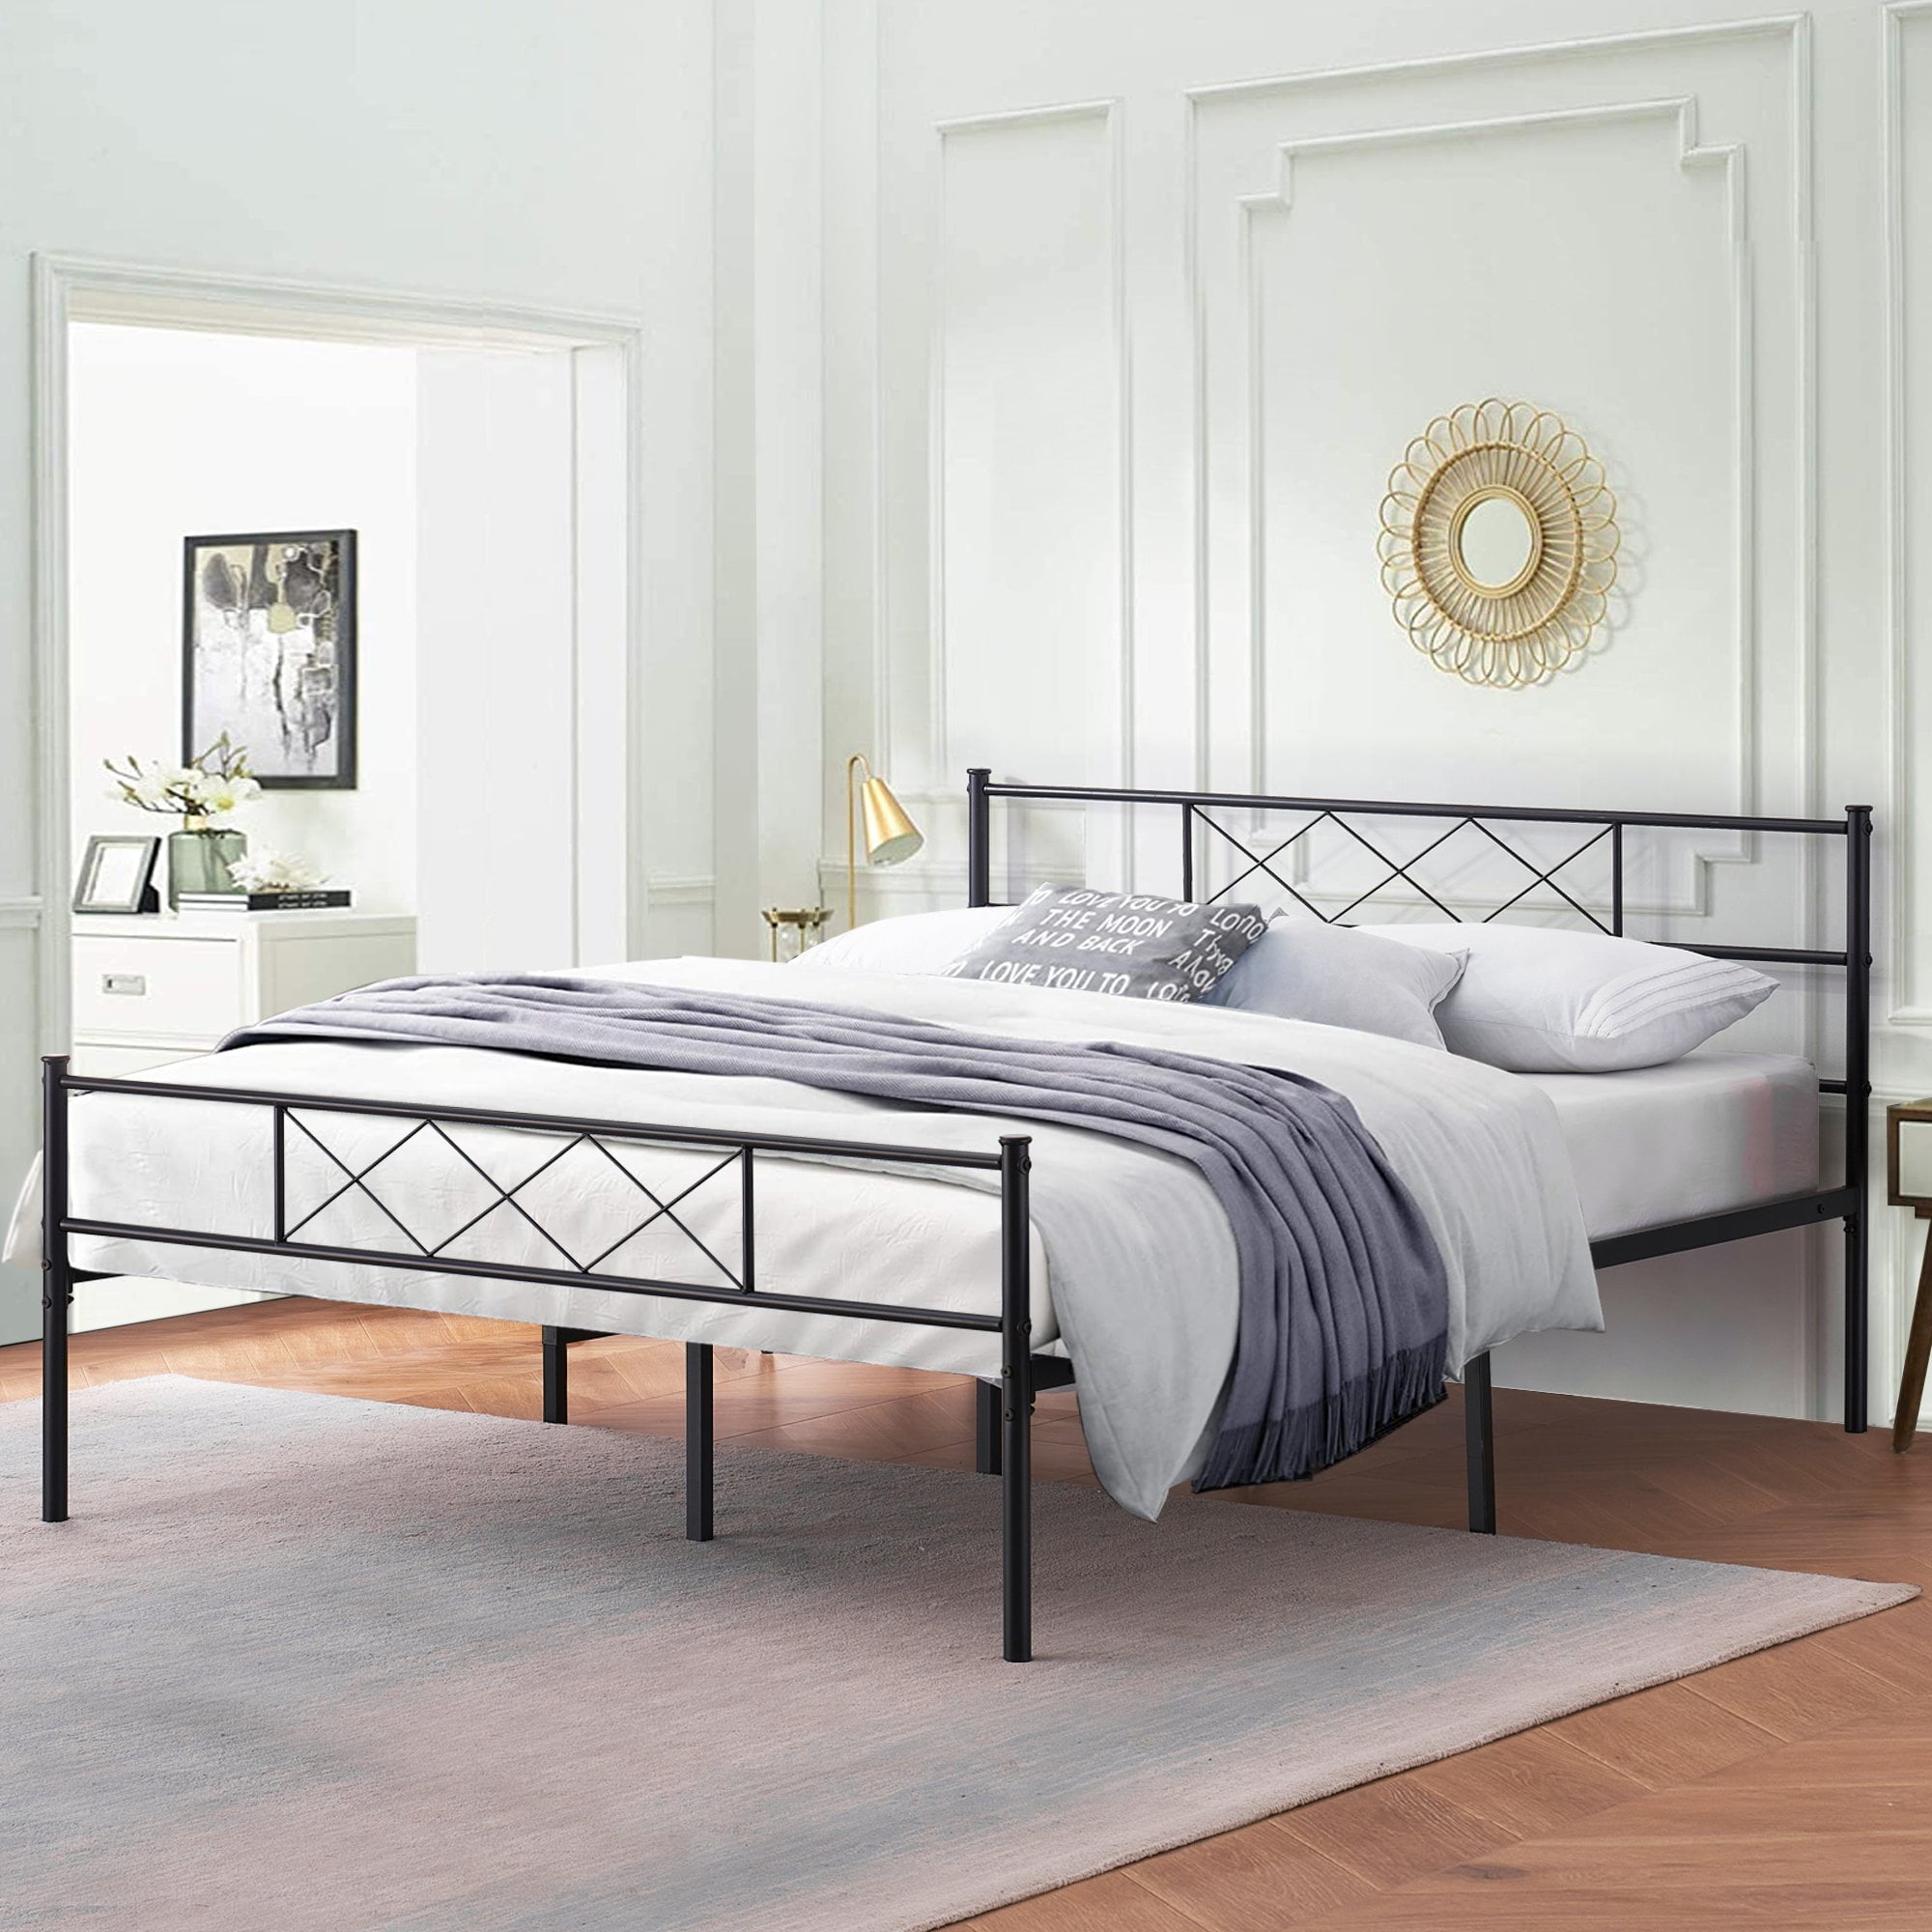 Queen Size Metal Platform Bed Frame, Bed Frame With Storage Space